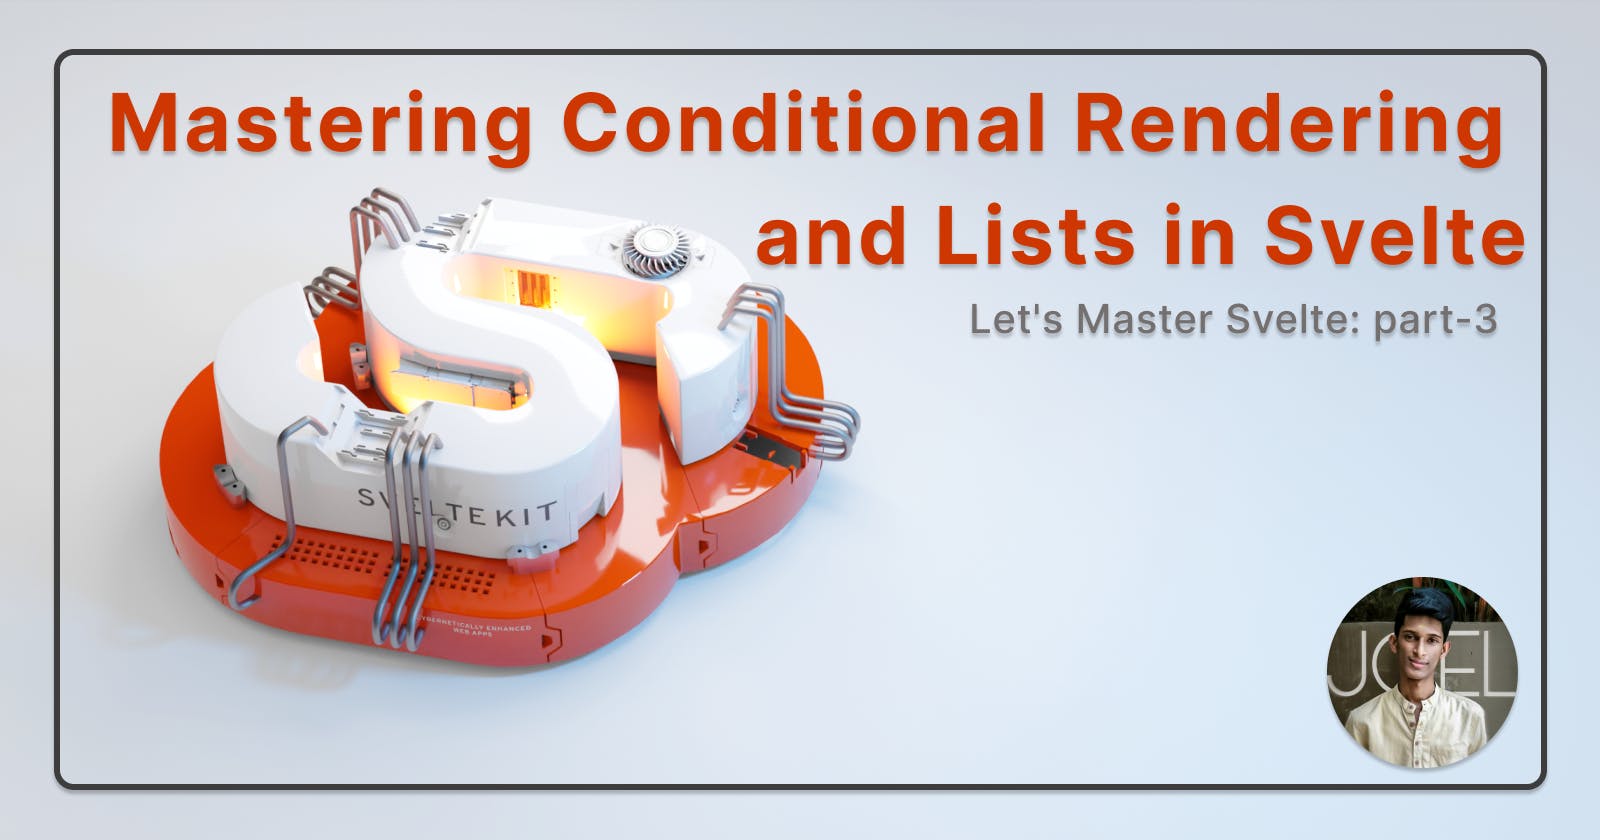 Mastering Conditional Rendering and Lists in Svelte